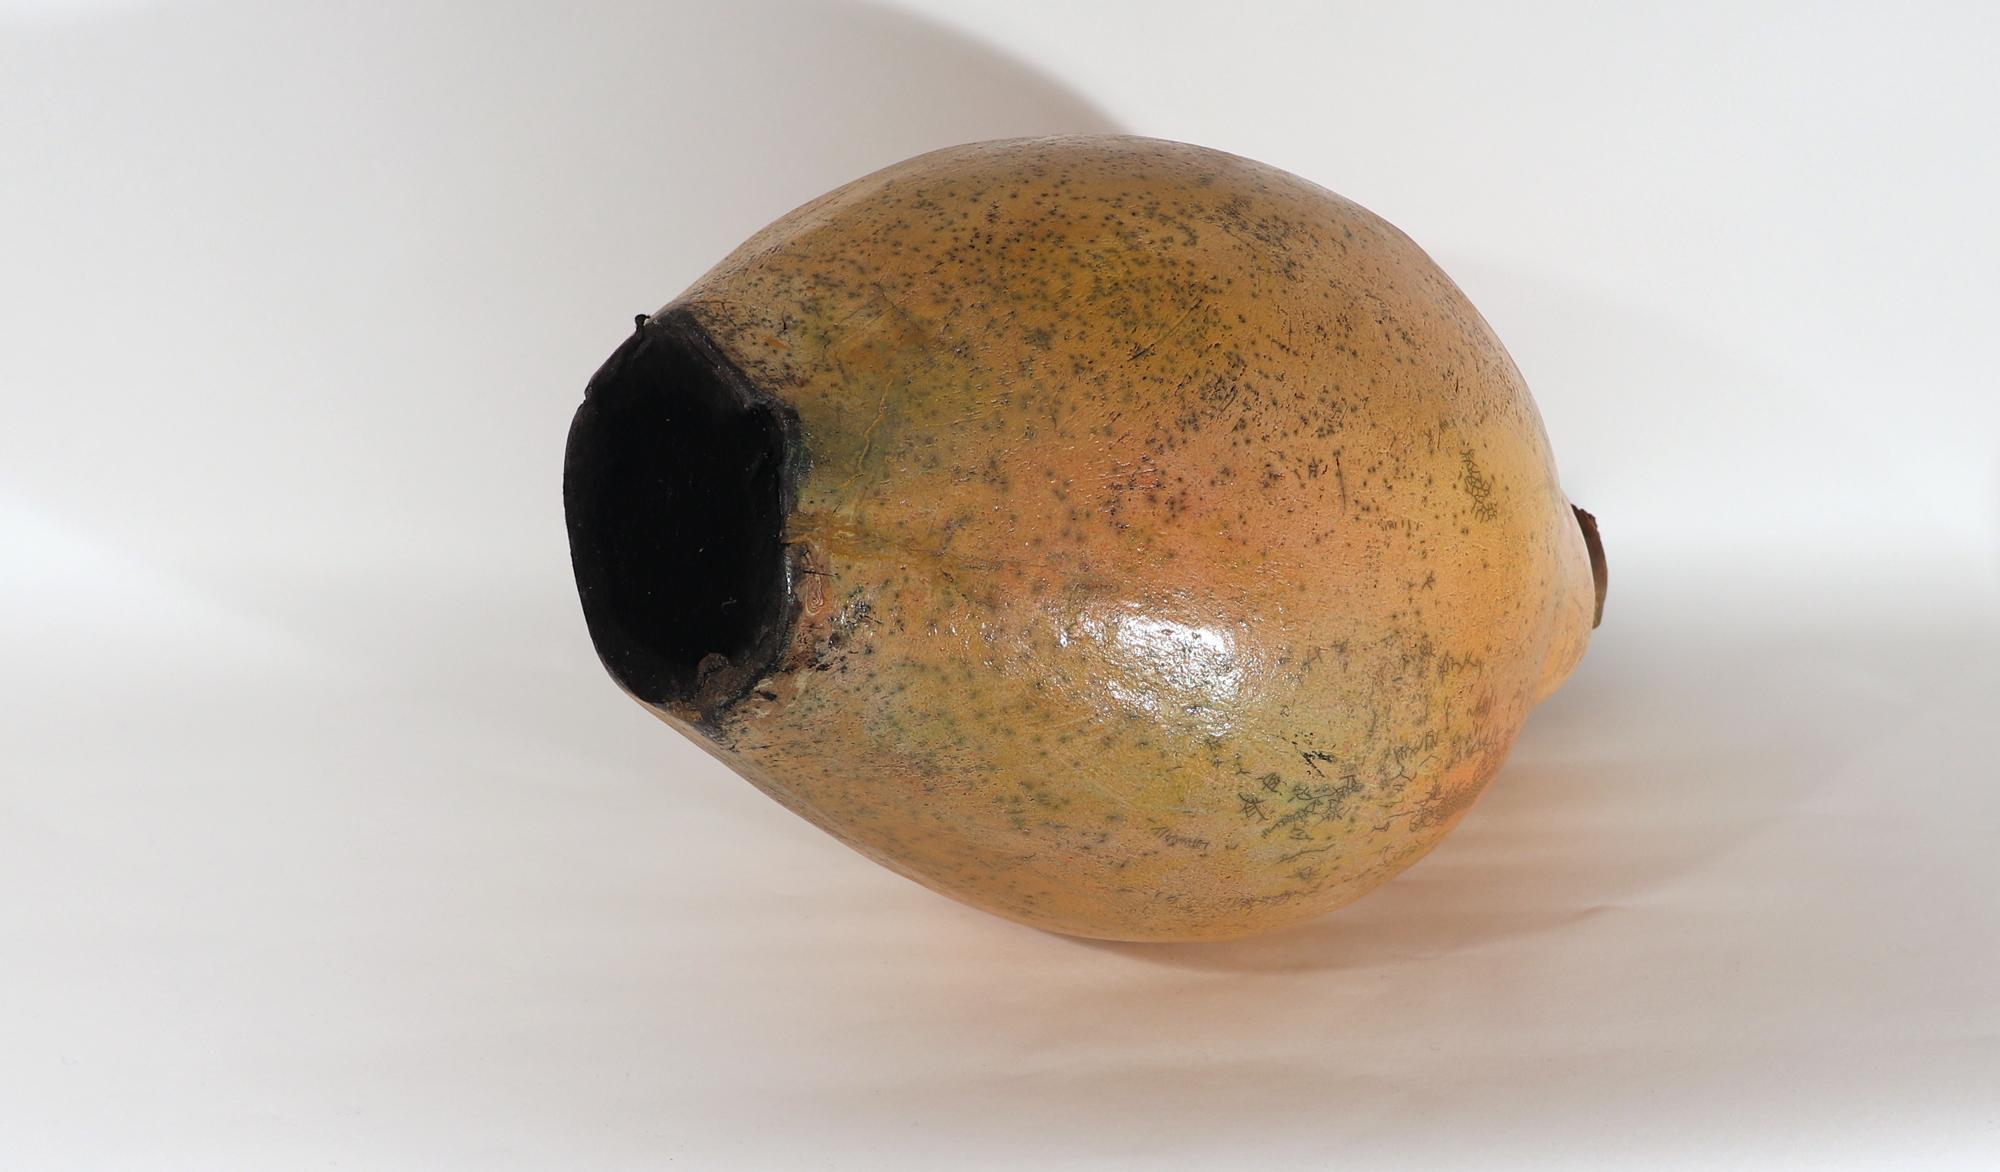 Oversized Raku Pottery Sculpture of a Pear by Renzo Faggioll For Sale 3